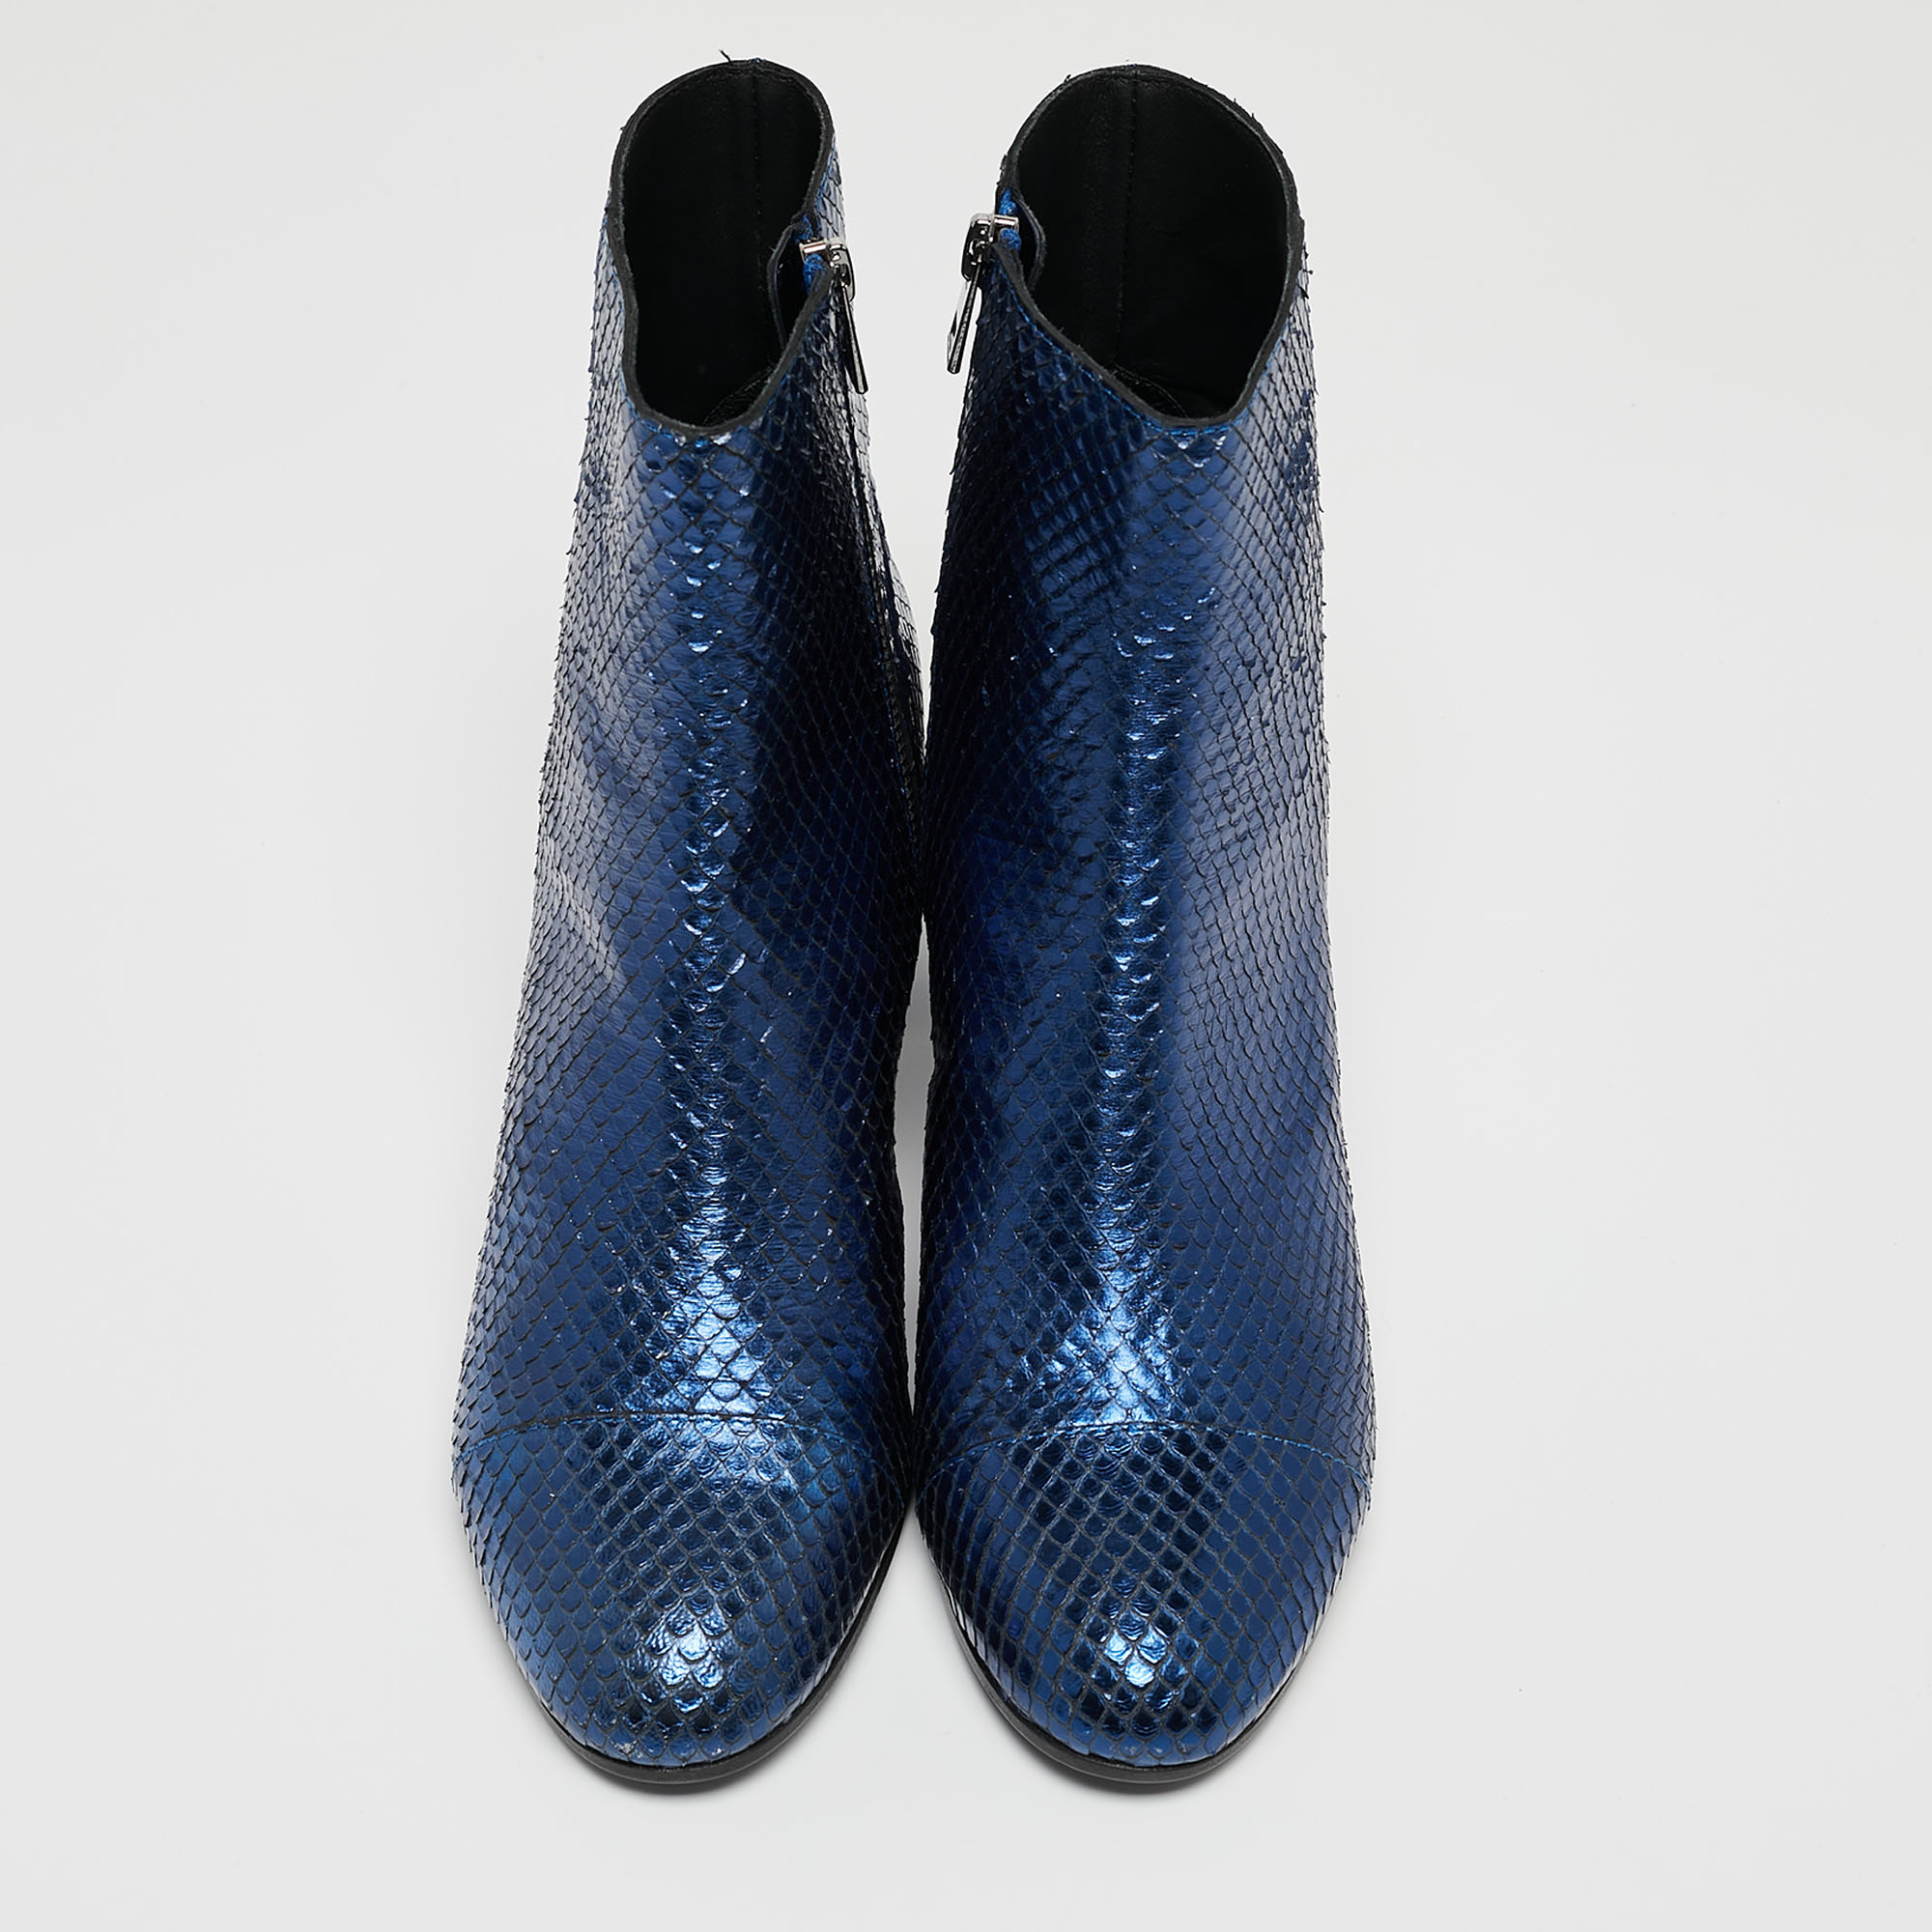 Zadiq & Voltaire Blue Python Embossed Leather Block Heel Ankle Boots Size 40